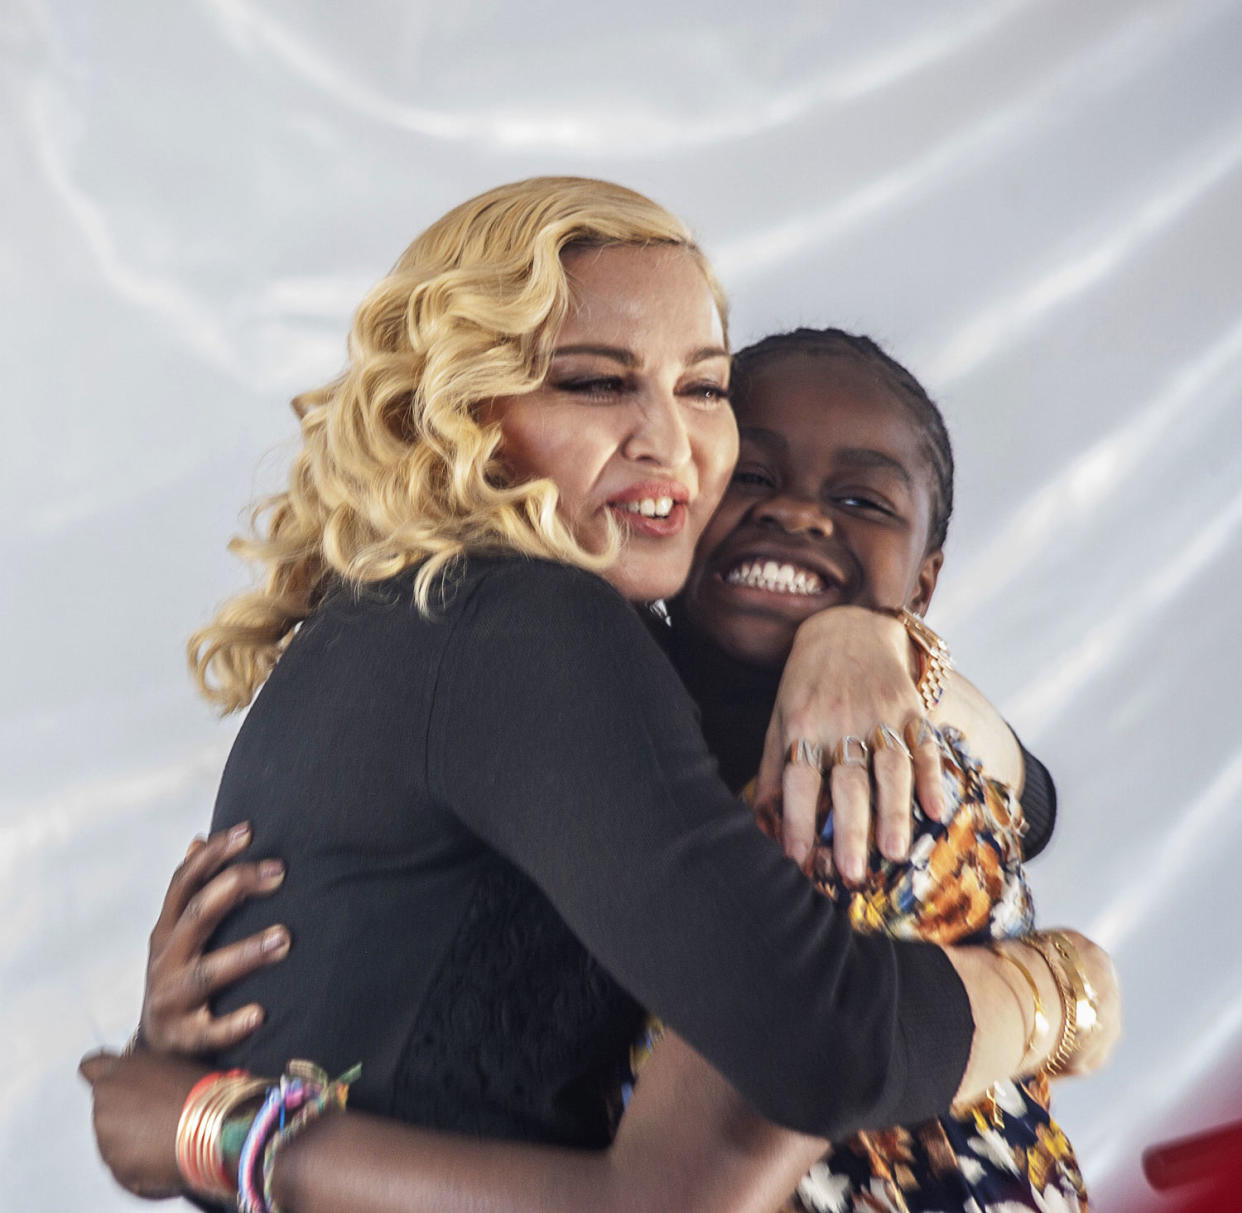 Madonna (L) hugs her Malawian adopted daughter Mercy James after she made a speech during the opening ceremony of the Mercy James Children's Hospital at Queen Elizabeth Central Hospital in Blantyre, Malawi, on July 11, 2017. (Amos Gumulira / AFP via Getty Images)